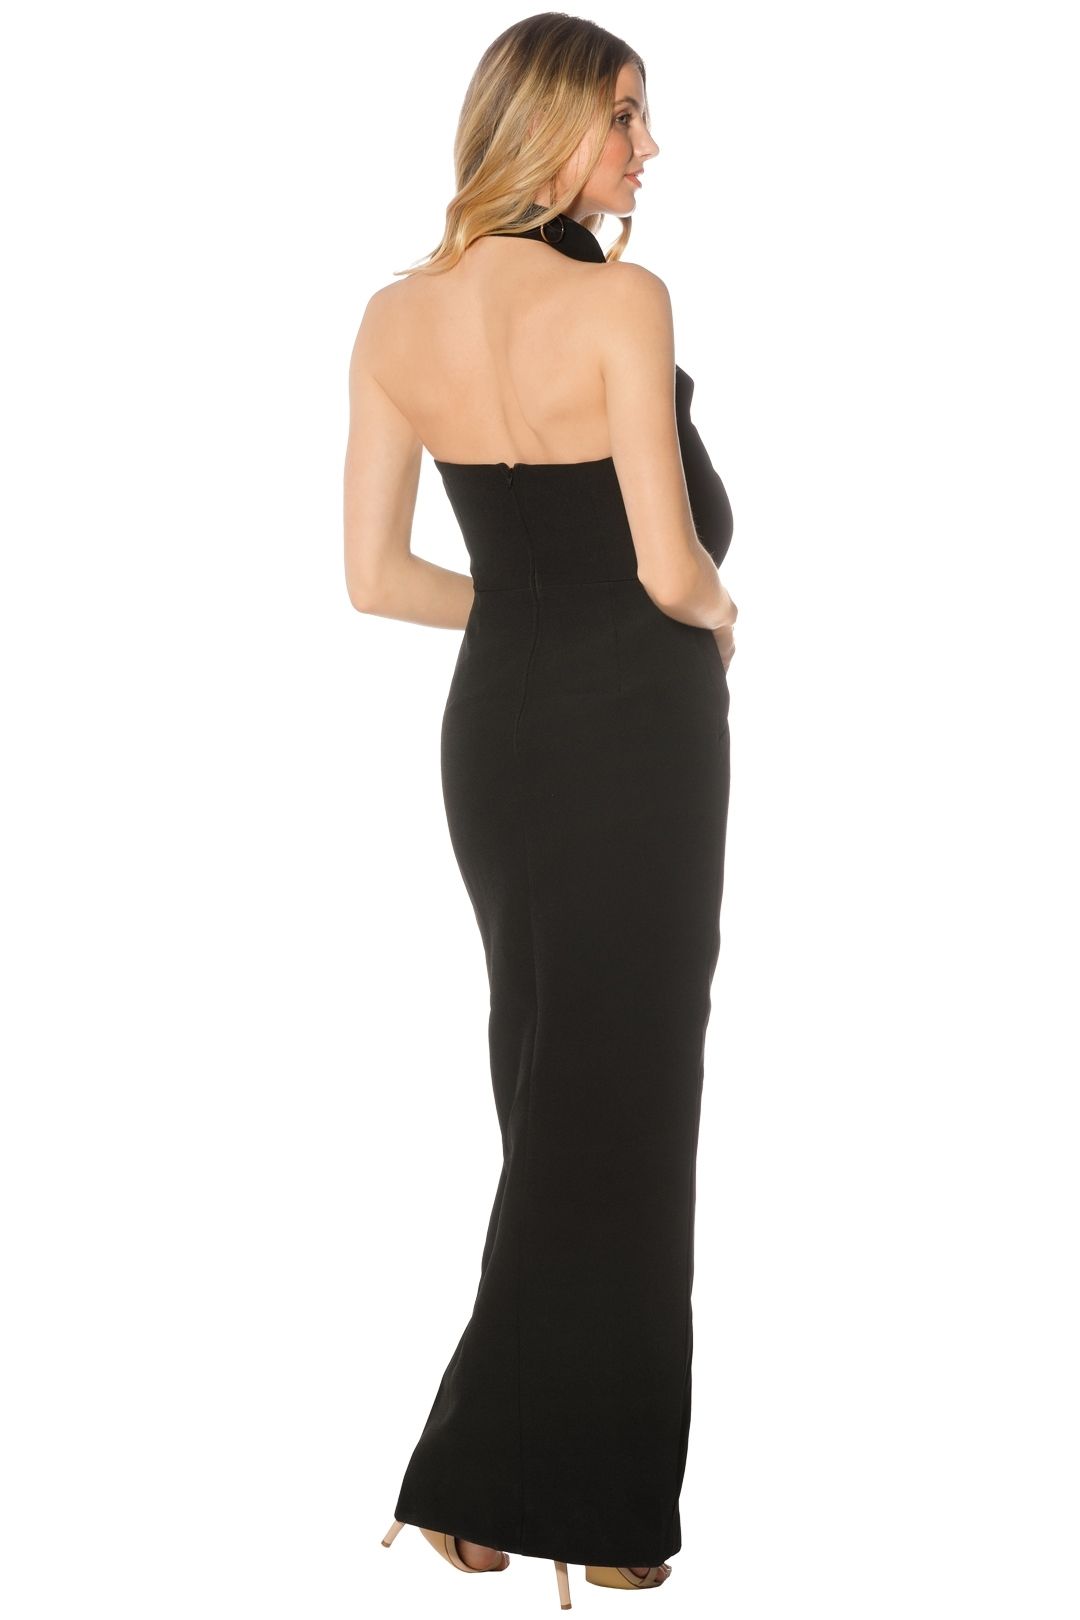 Keepsake The Label - Dance with me Gown - Black - Back